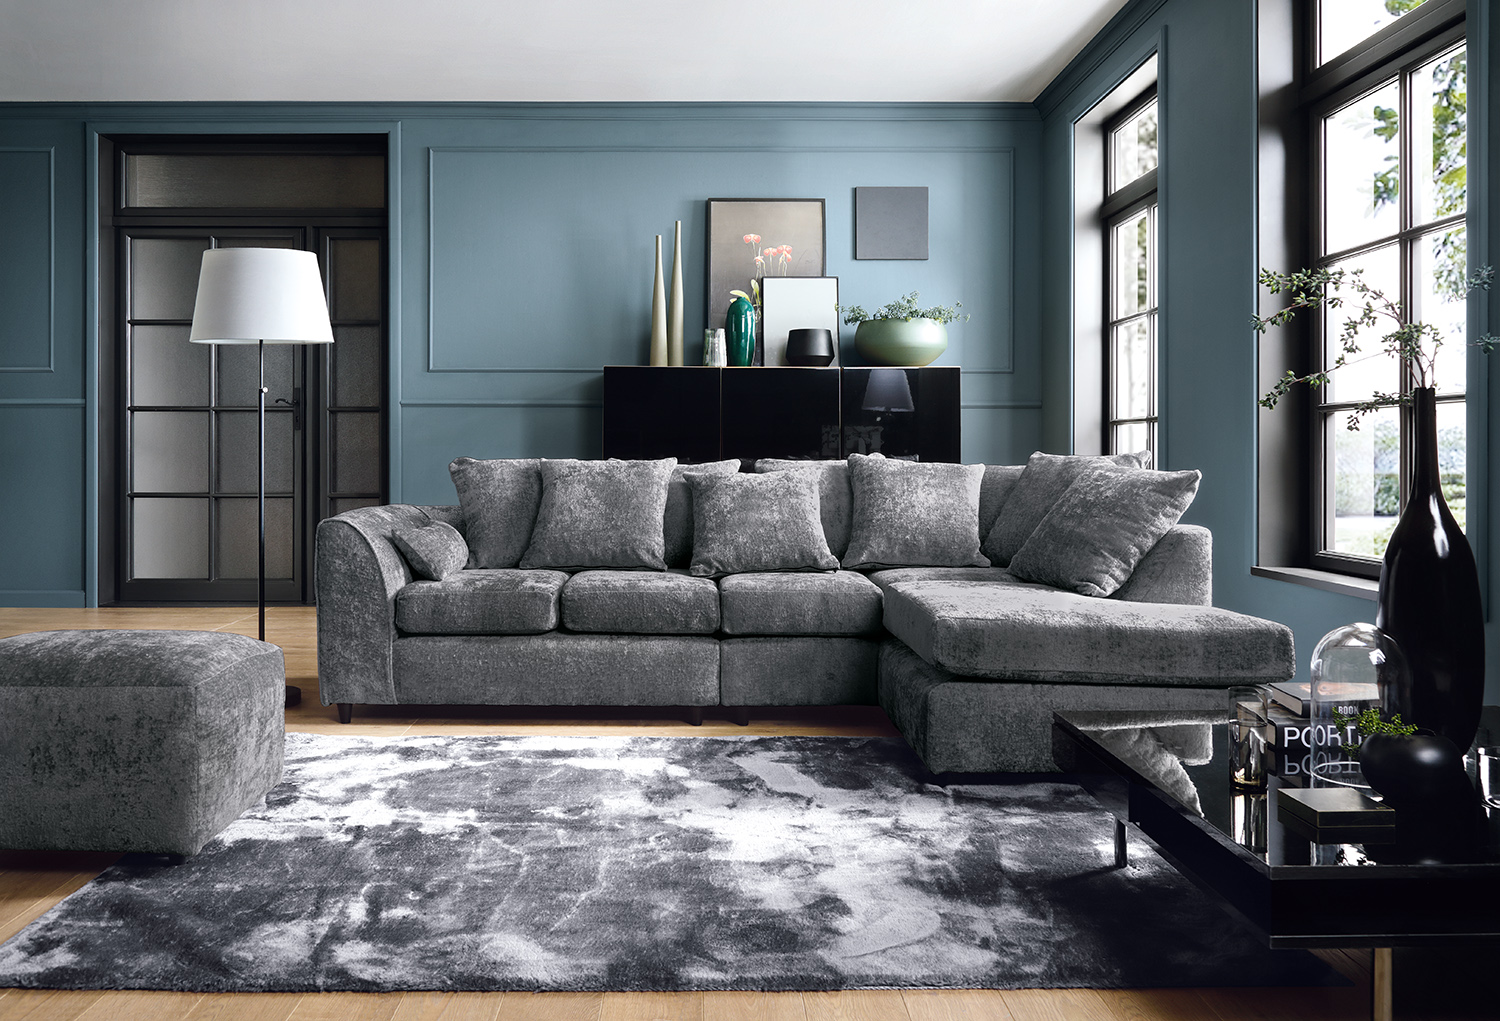 gray is neutral and you can pair it with many colors